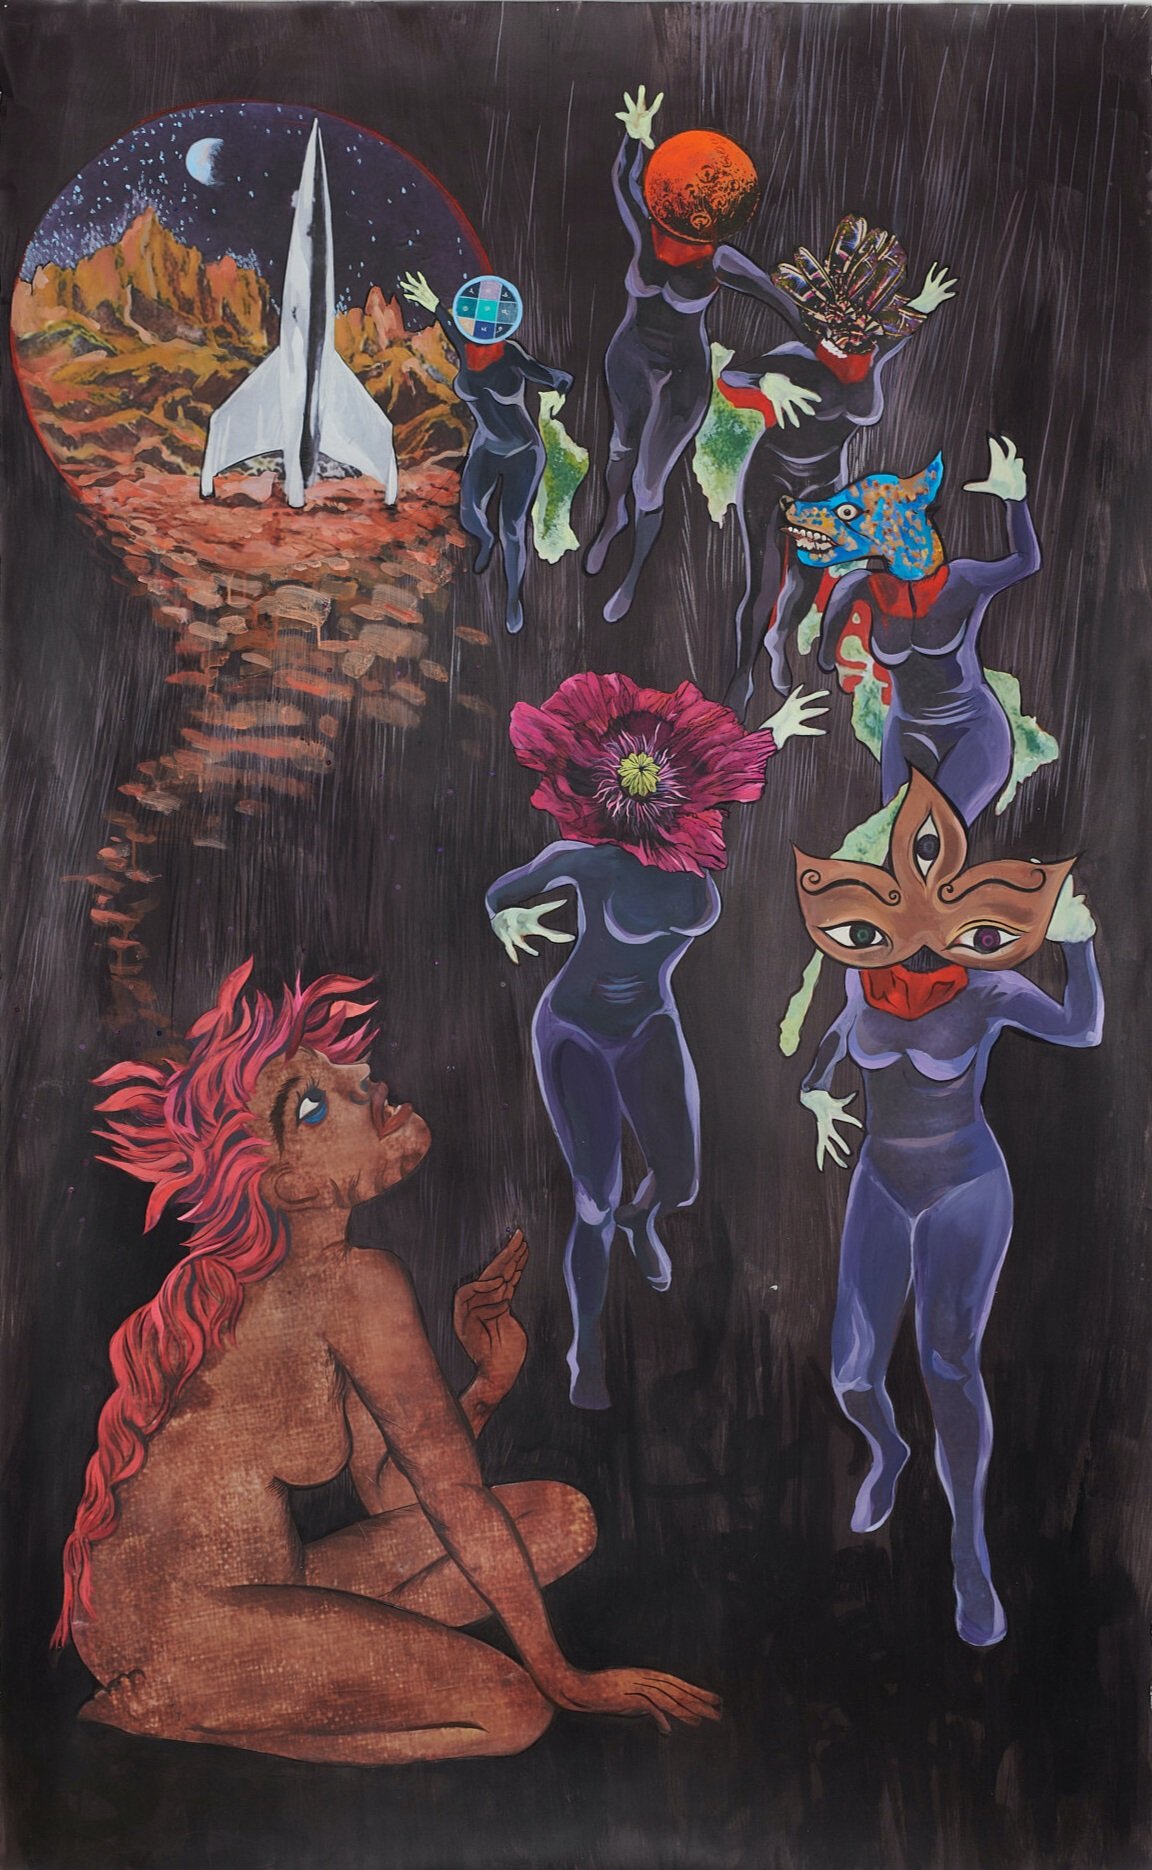  Chitra Ganesh,  Return of the Cat Woman,  2018, acrylic, ink, kodak repositionable fabric paper and glass beads on paper on linen, 51 x 82 inches (129.54 x 208.28 cm) 